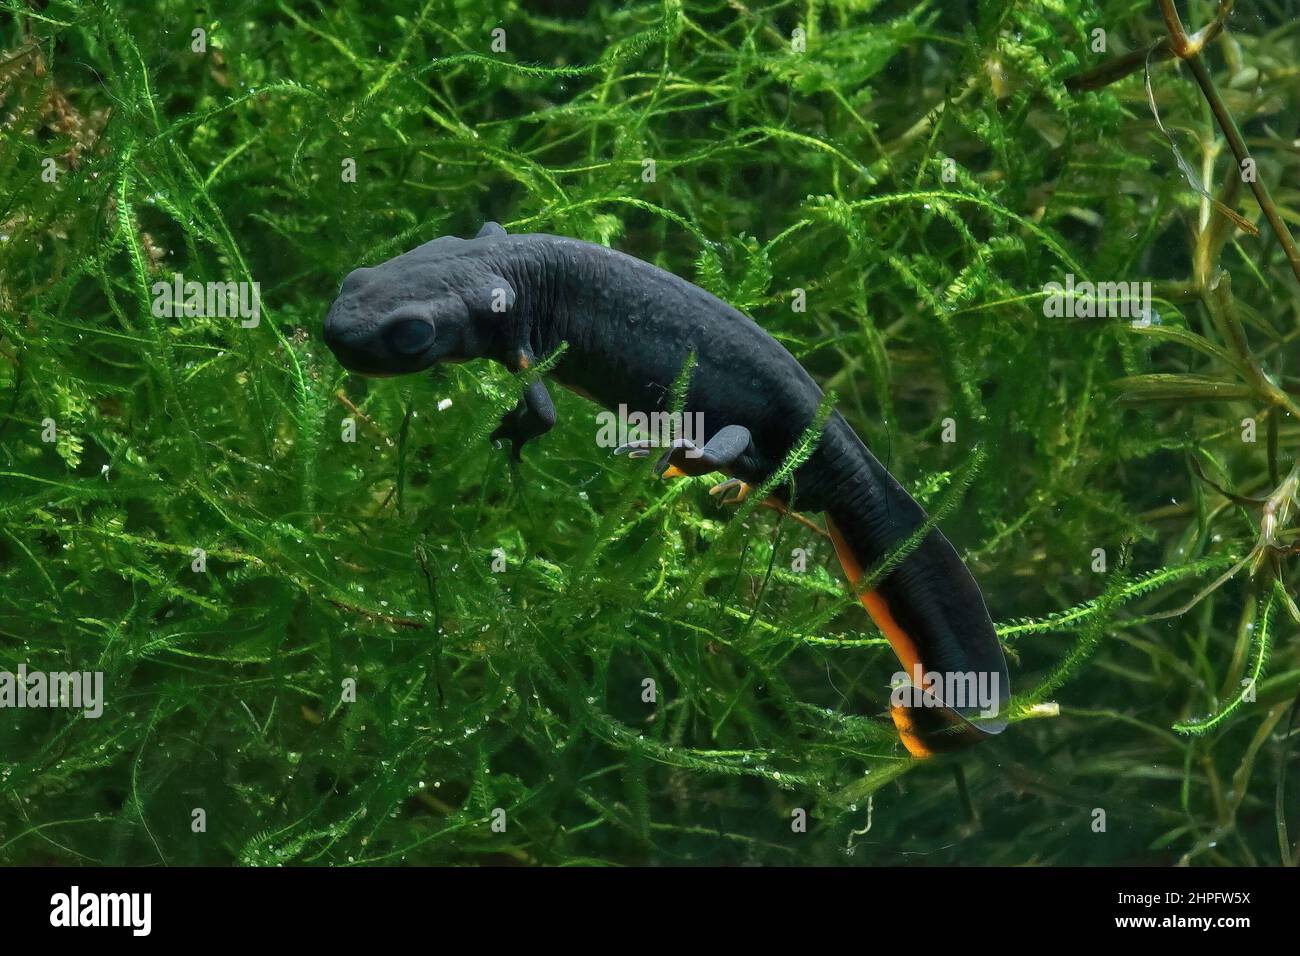 Closeup on an aquatic adult Chinese firebellied newt, Cynops orientalis, in Java moss Stock Photo